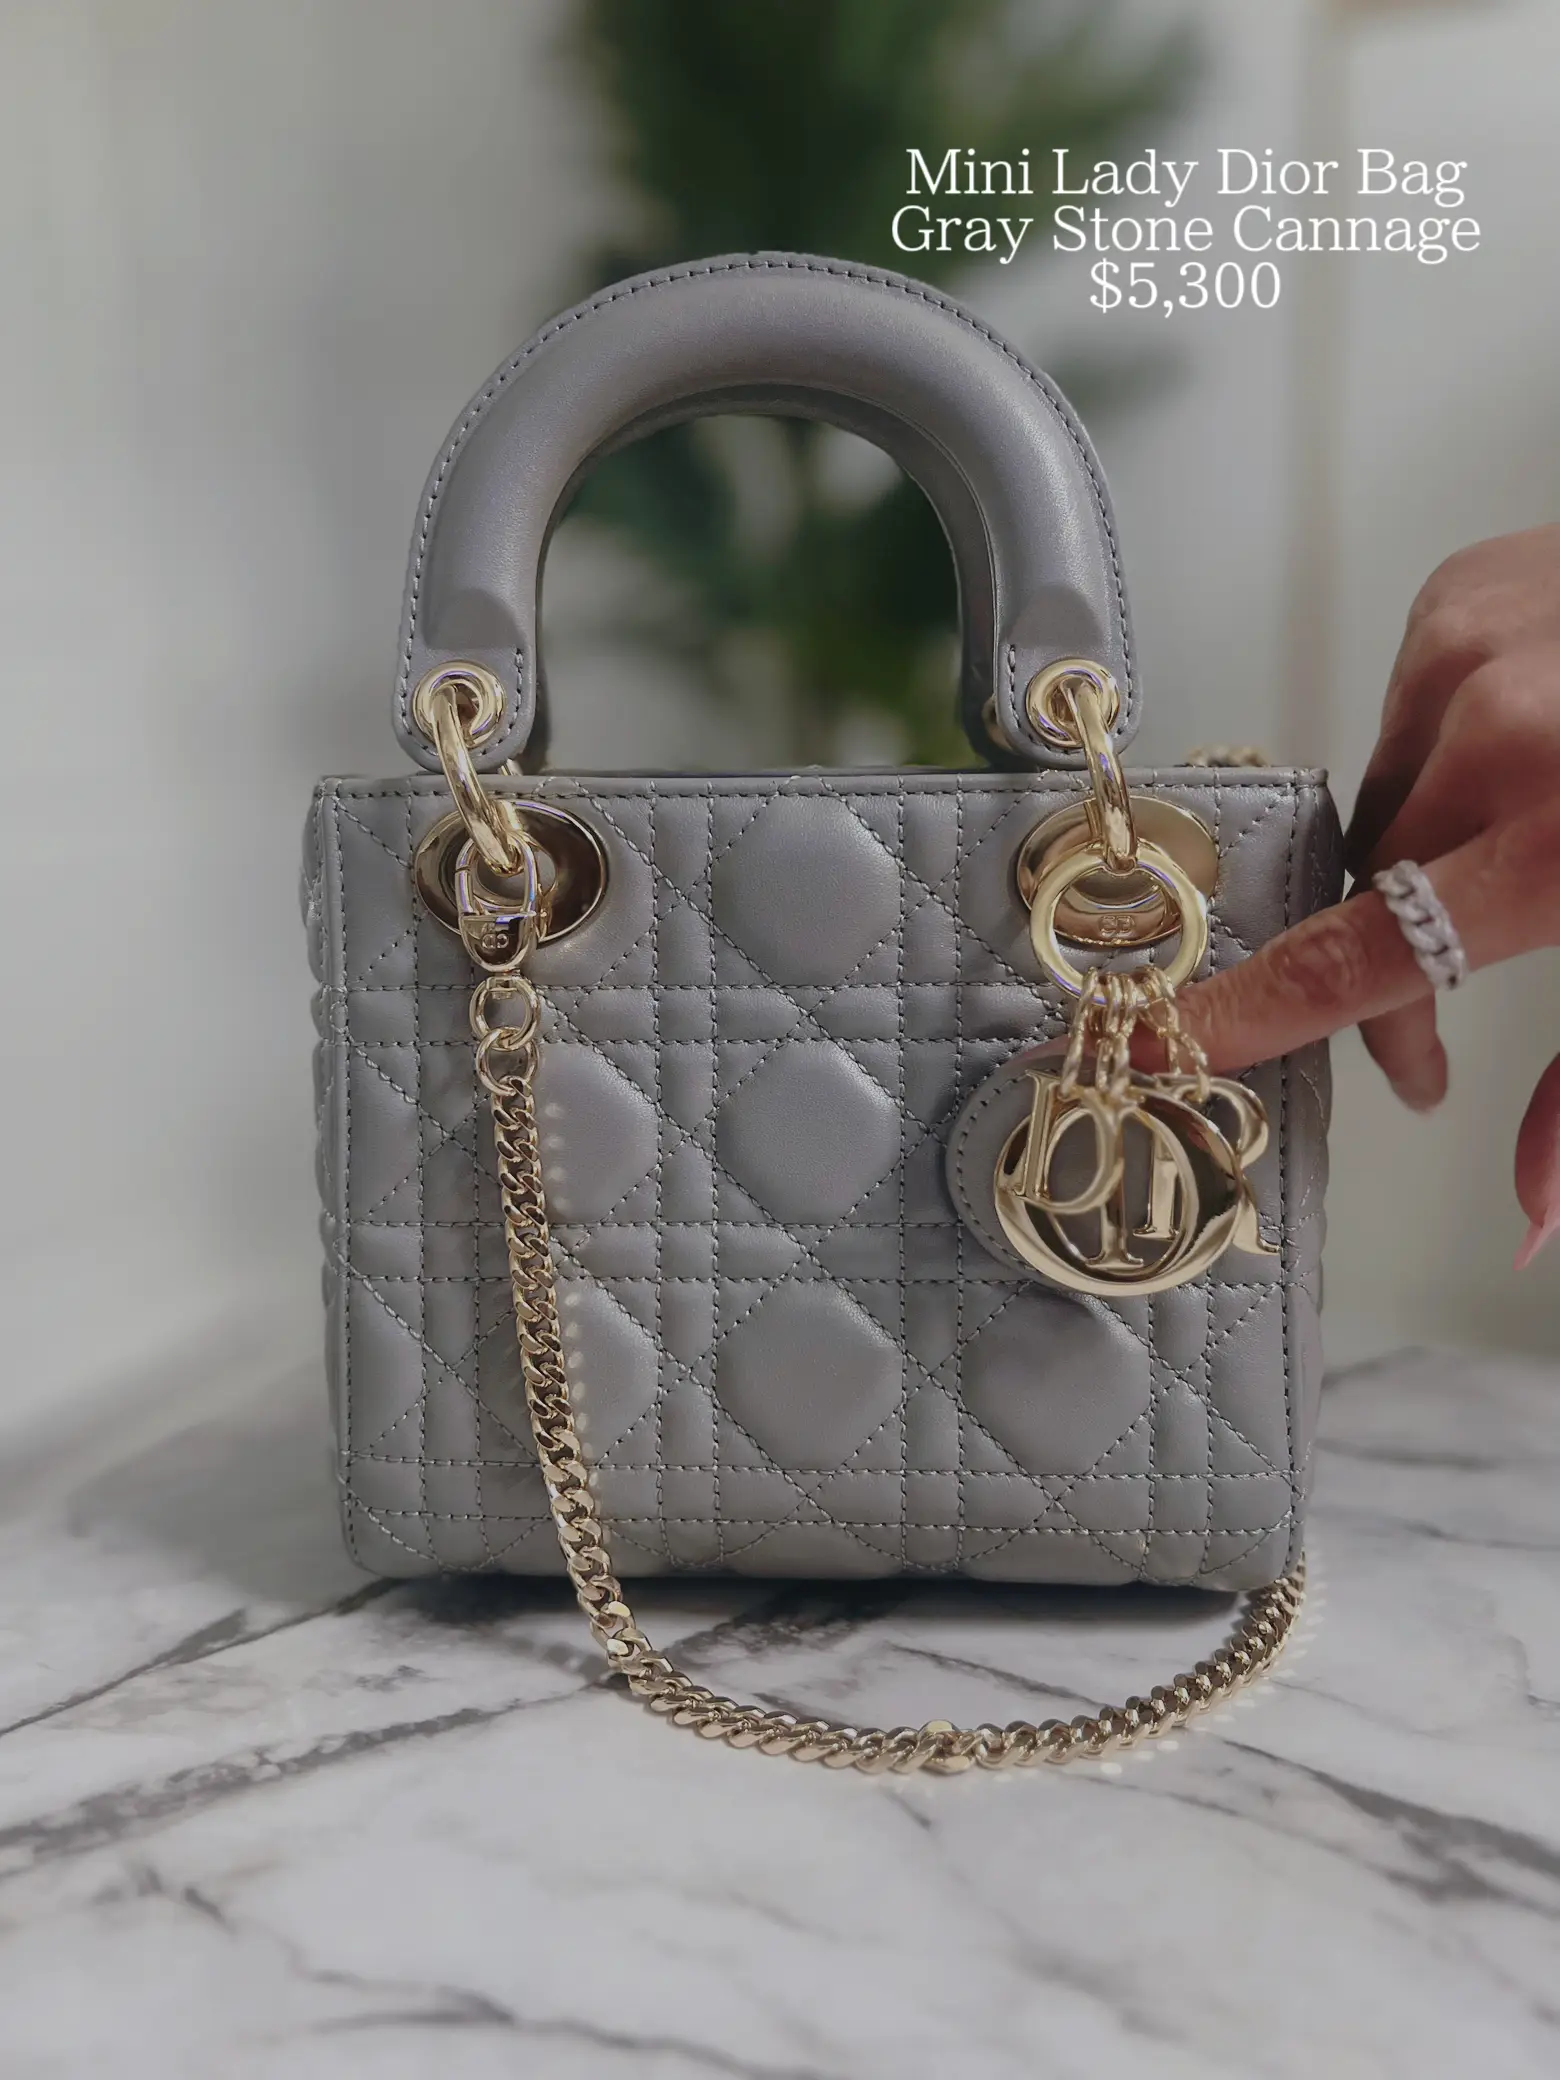 Lady Dior Bag Review, Gallery posted by Tiffany Durrah